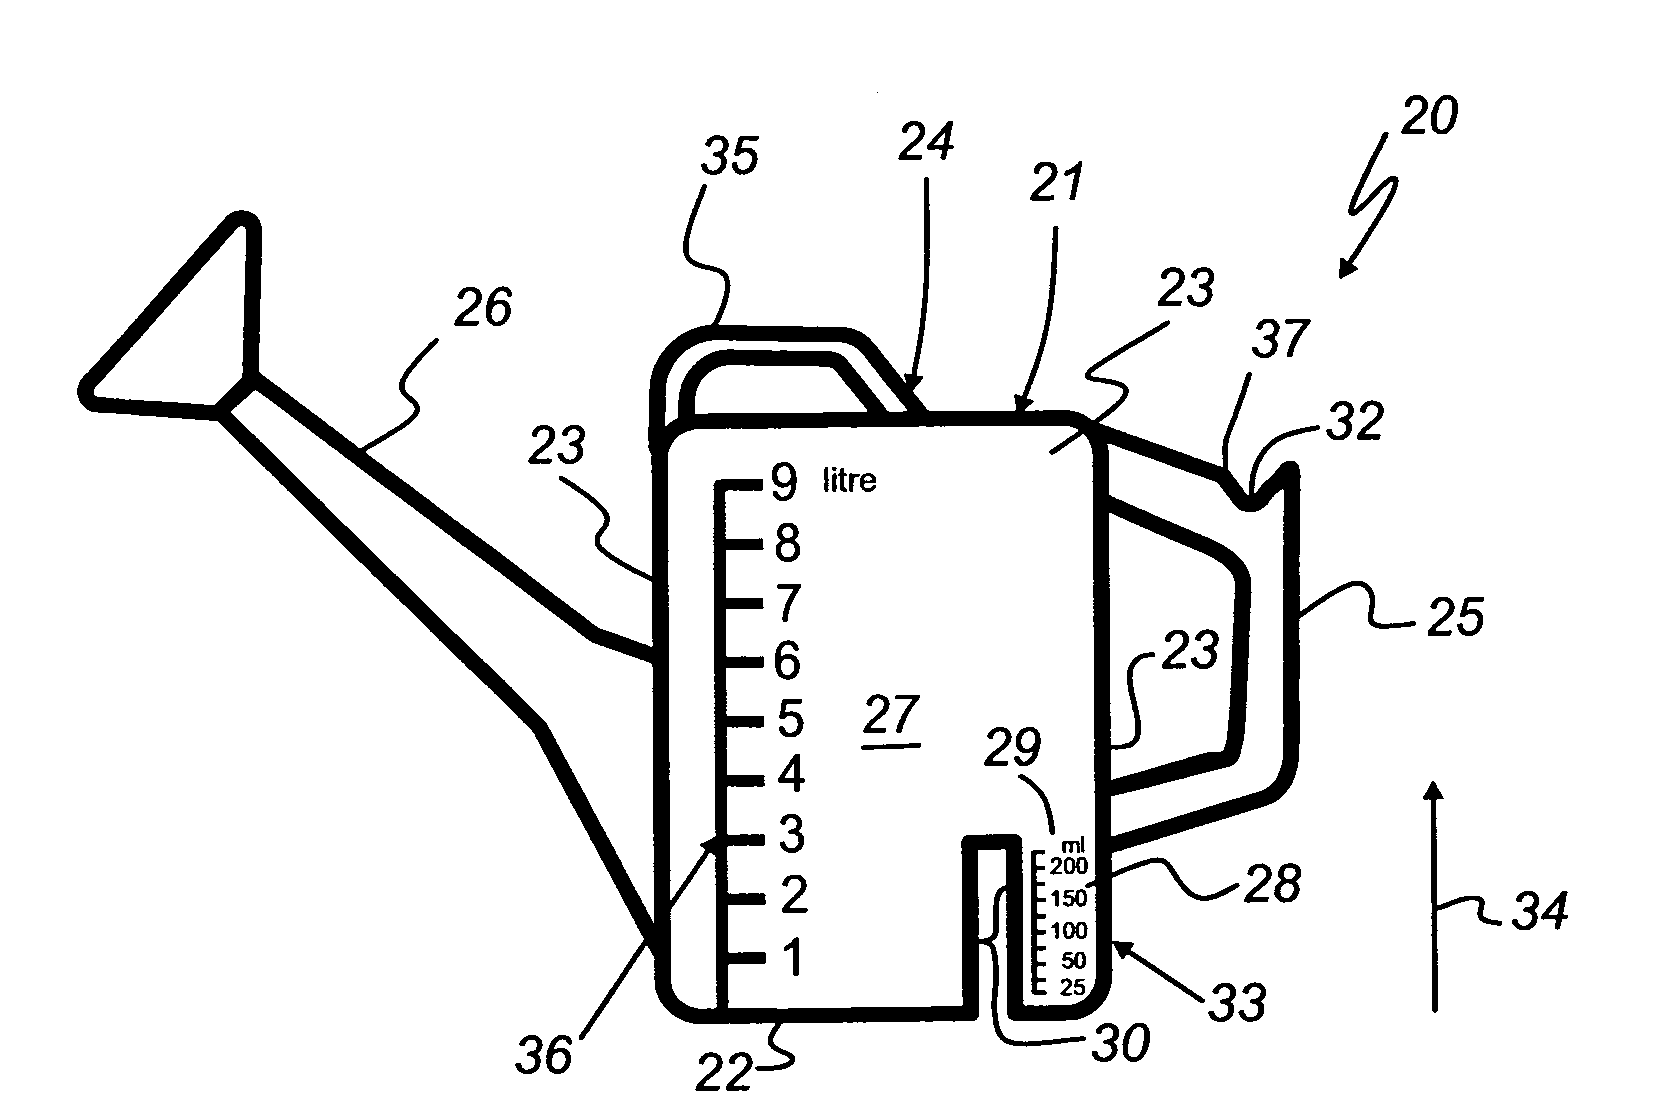 Container to receive liquids to aid in the volumetric measuring of the liquids